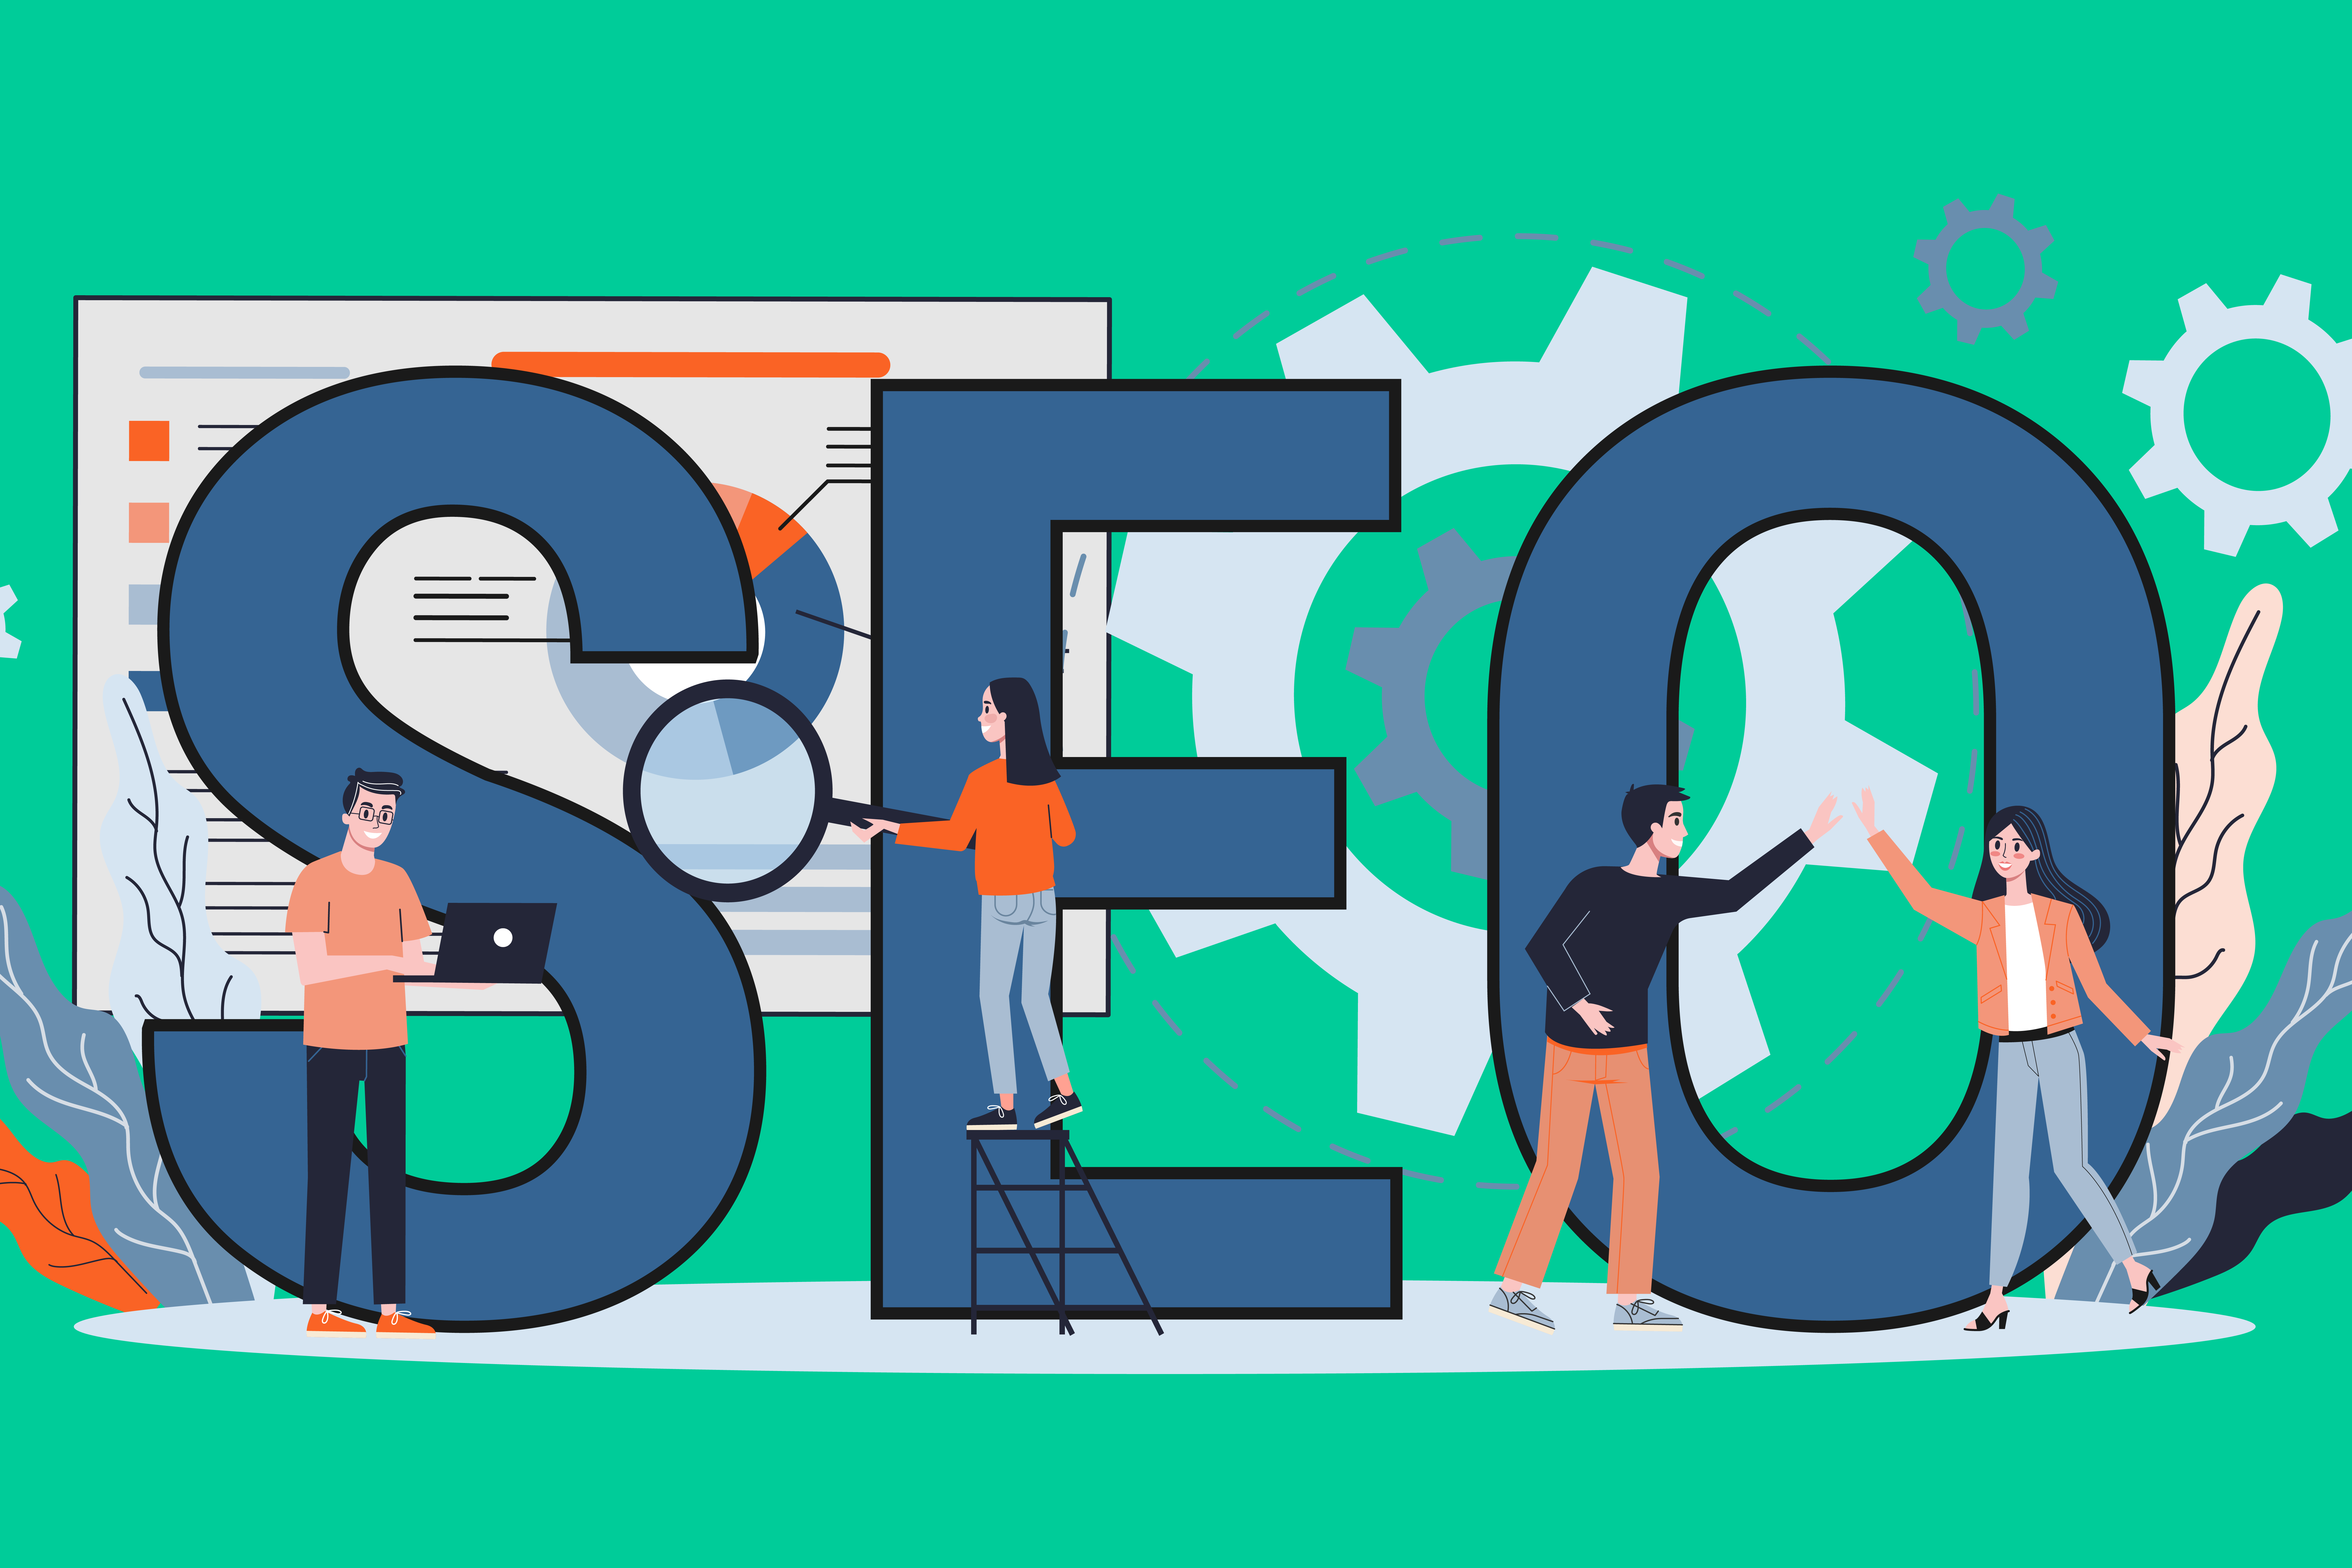 Three individuals interact with large letters spelling out "seo," which stands for search engine optimization, against a background symbolizing the digital nature of the industry.